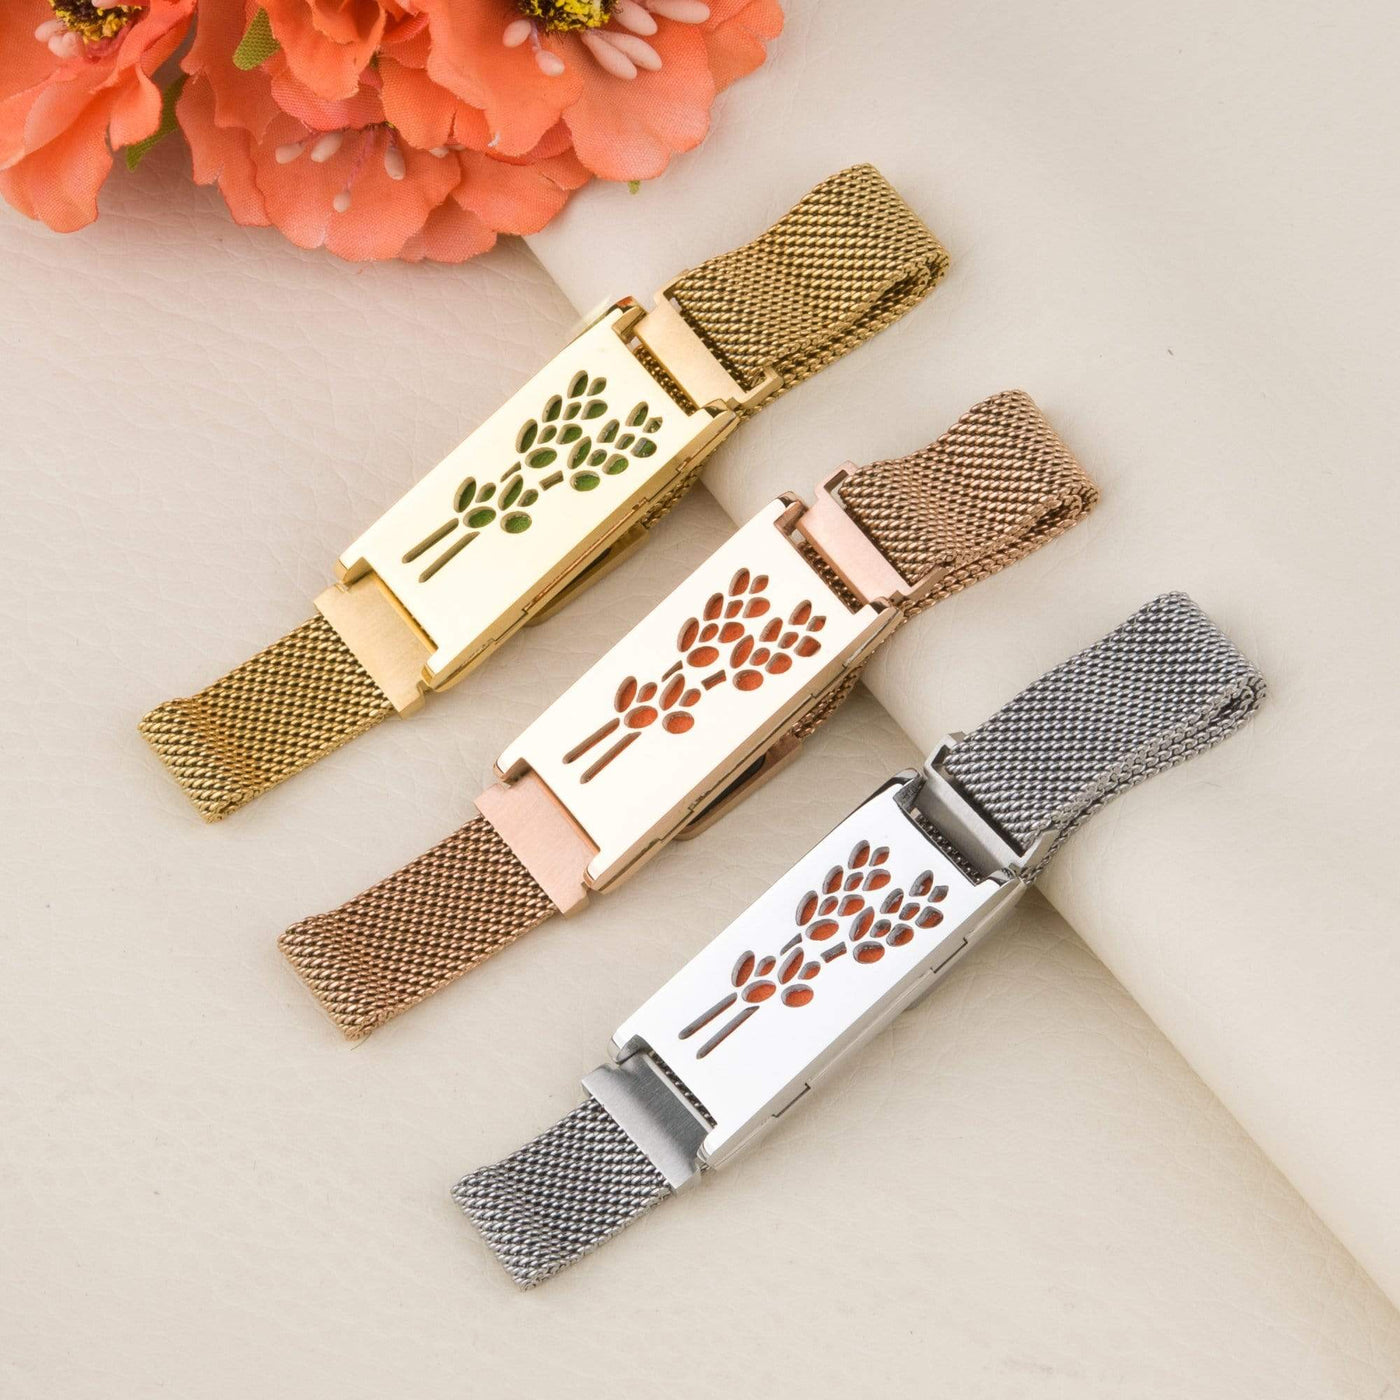 Lavender Watchband Aromatherapy Bracelets - Oil Life Canada - Canada's Best Essential Oil Supplies